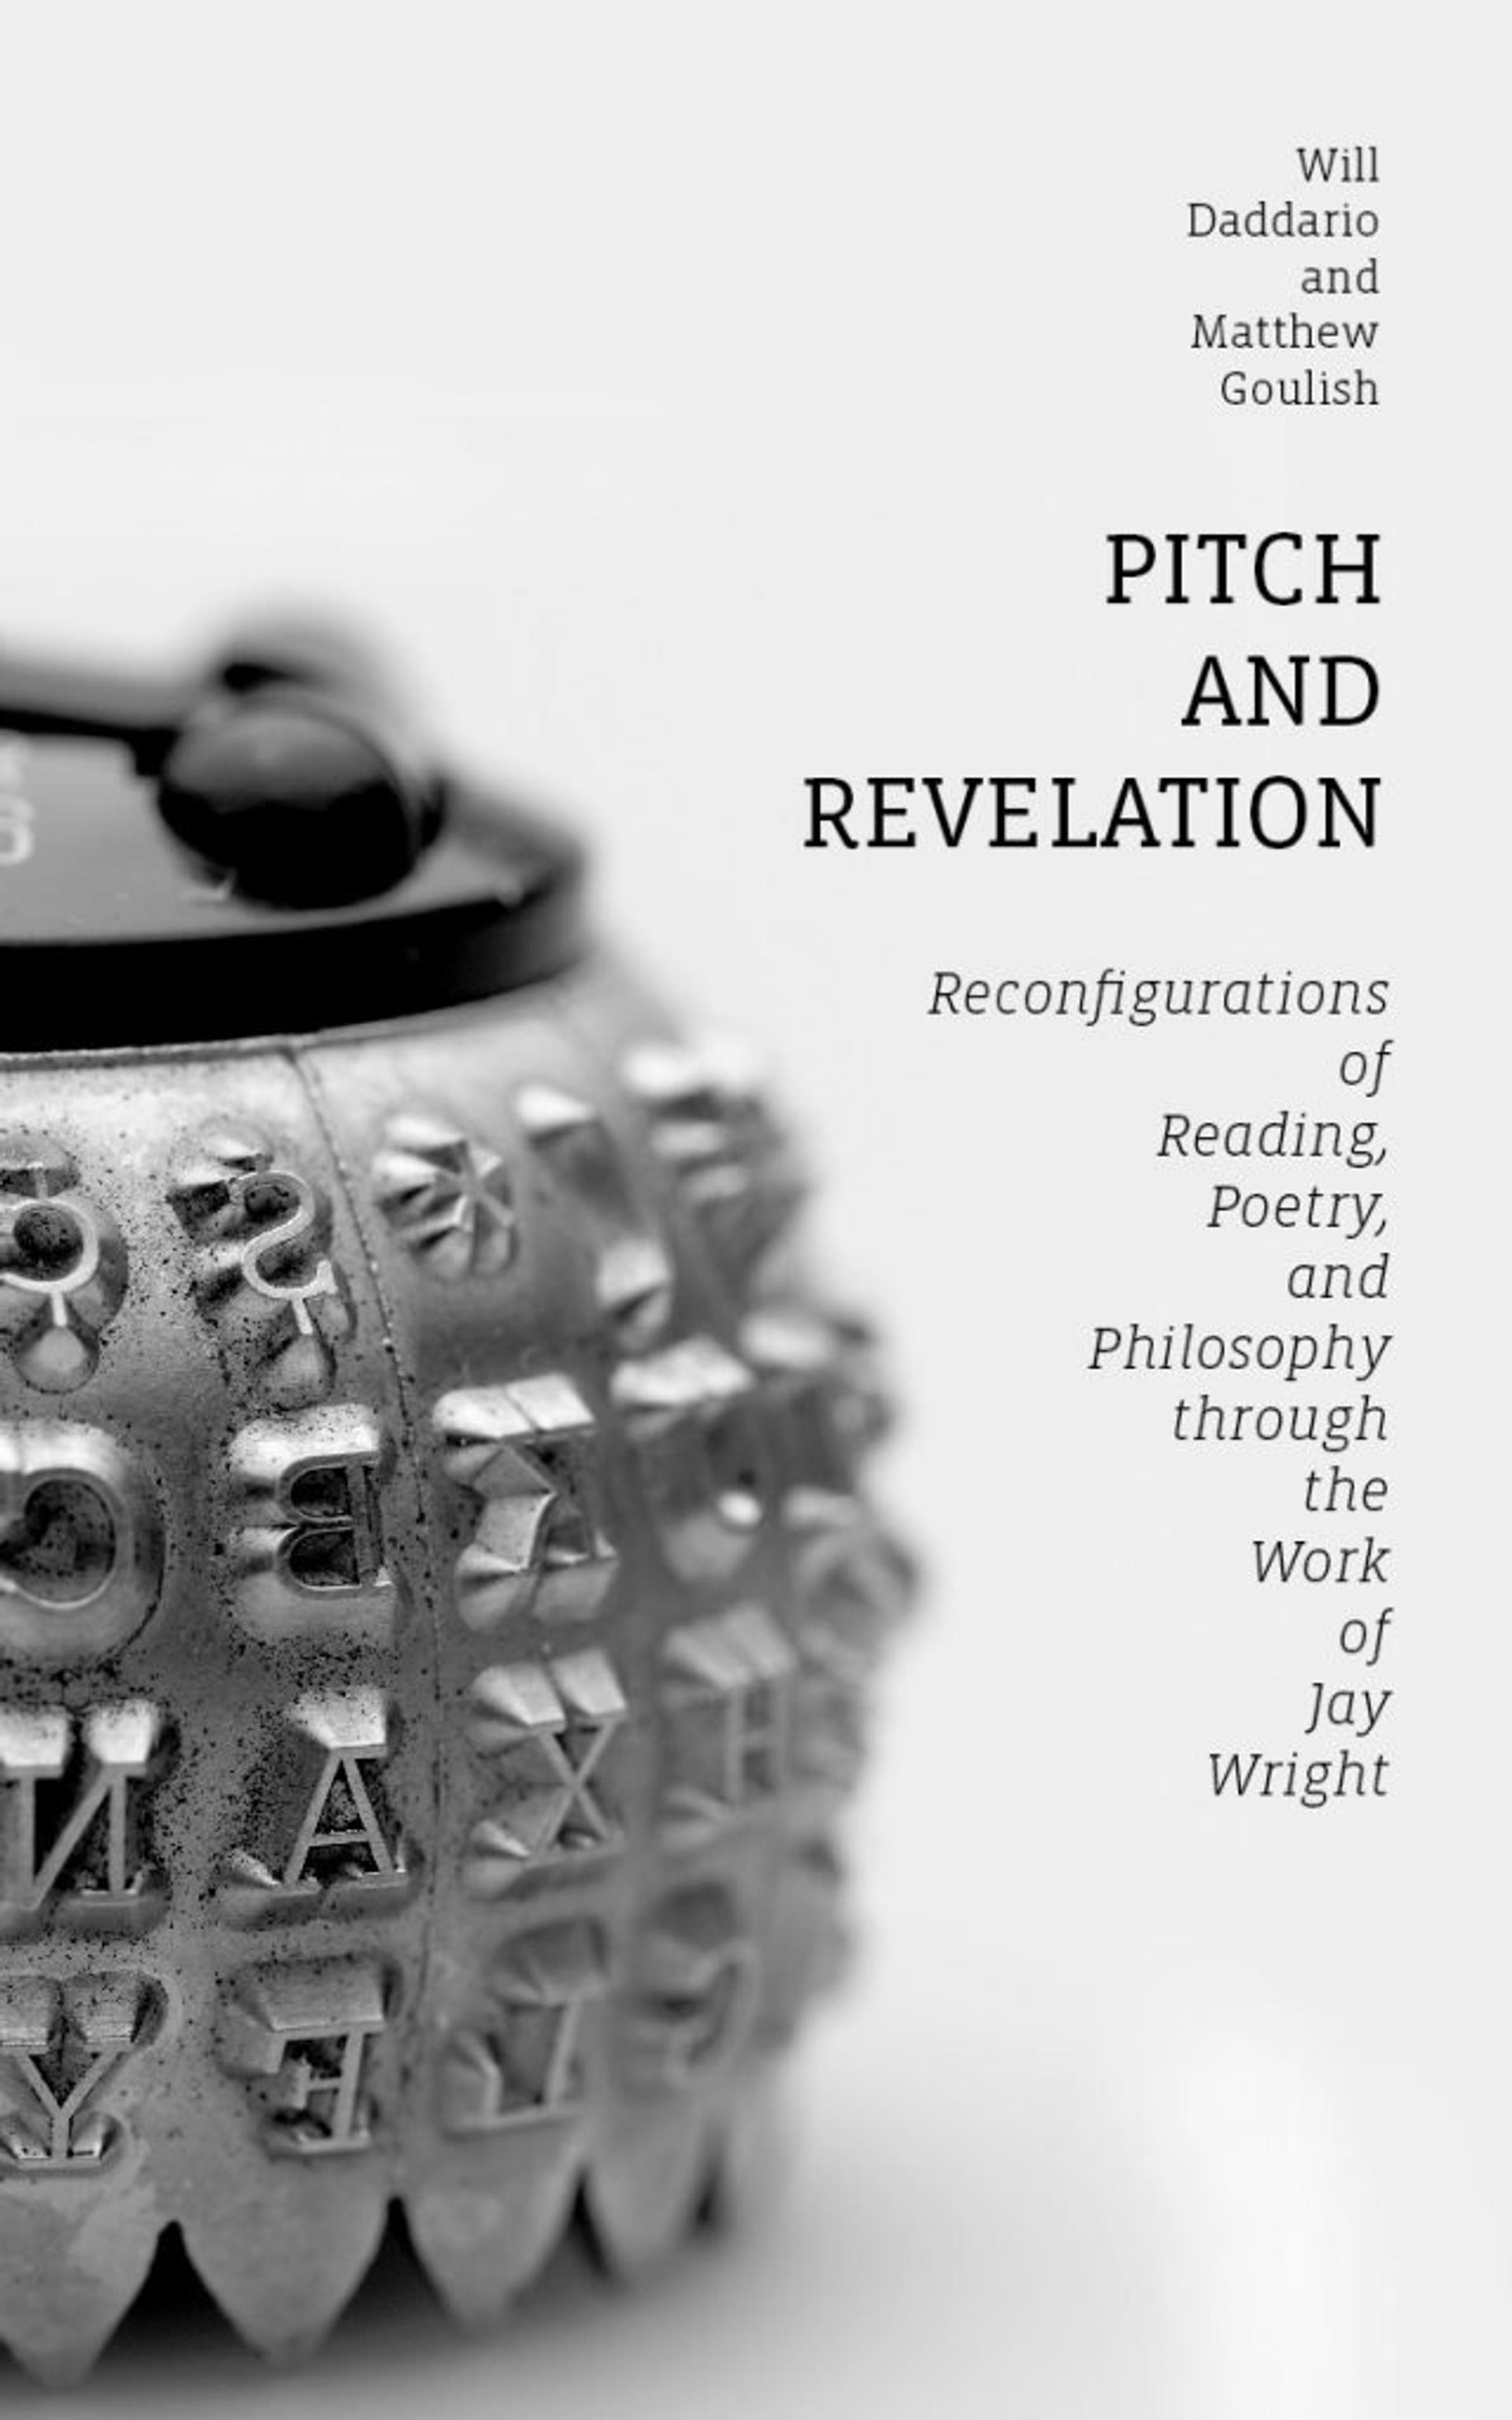 Cover of book titled Pitch and Revelation: Reconfigurations of Reading, Poetry, and Philosophy through the Work of Jay Wright